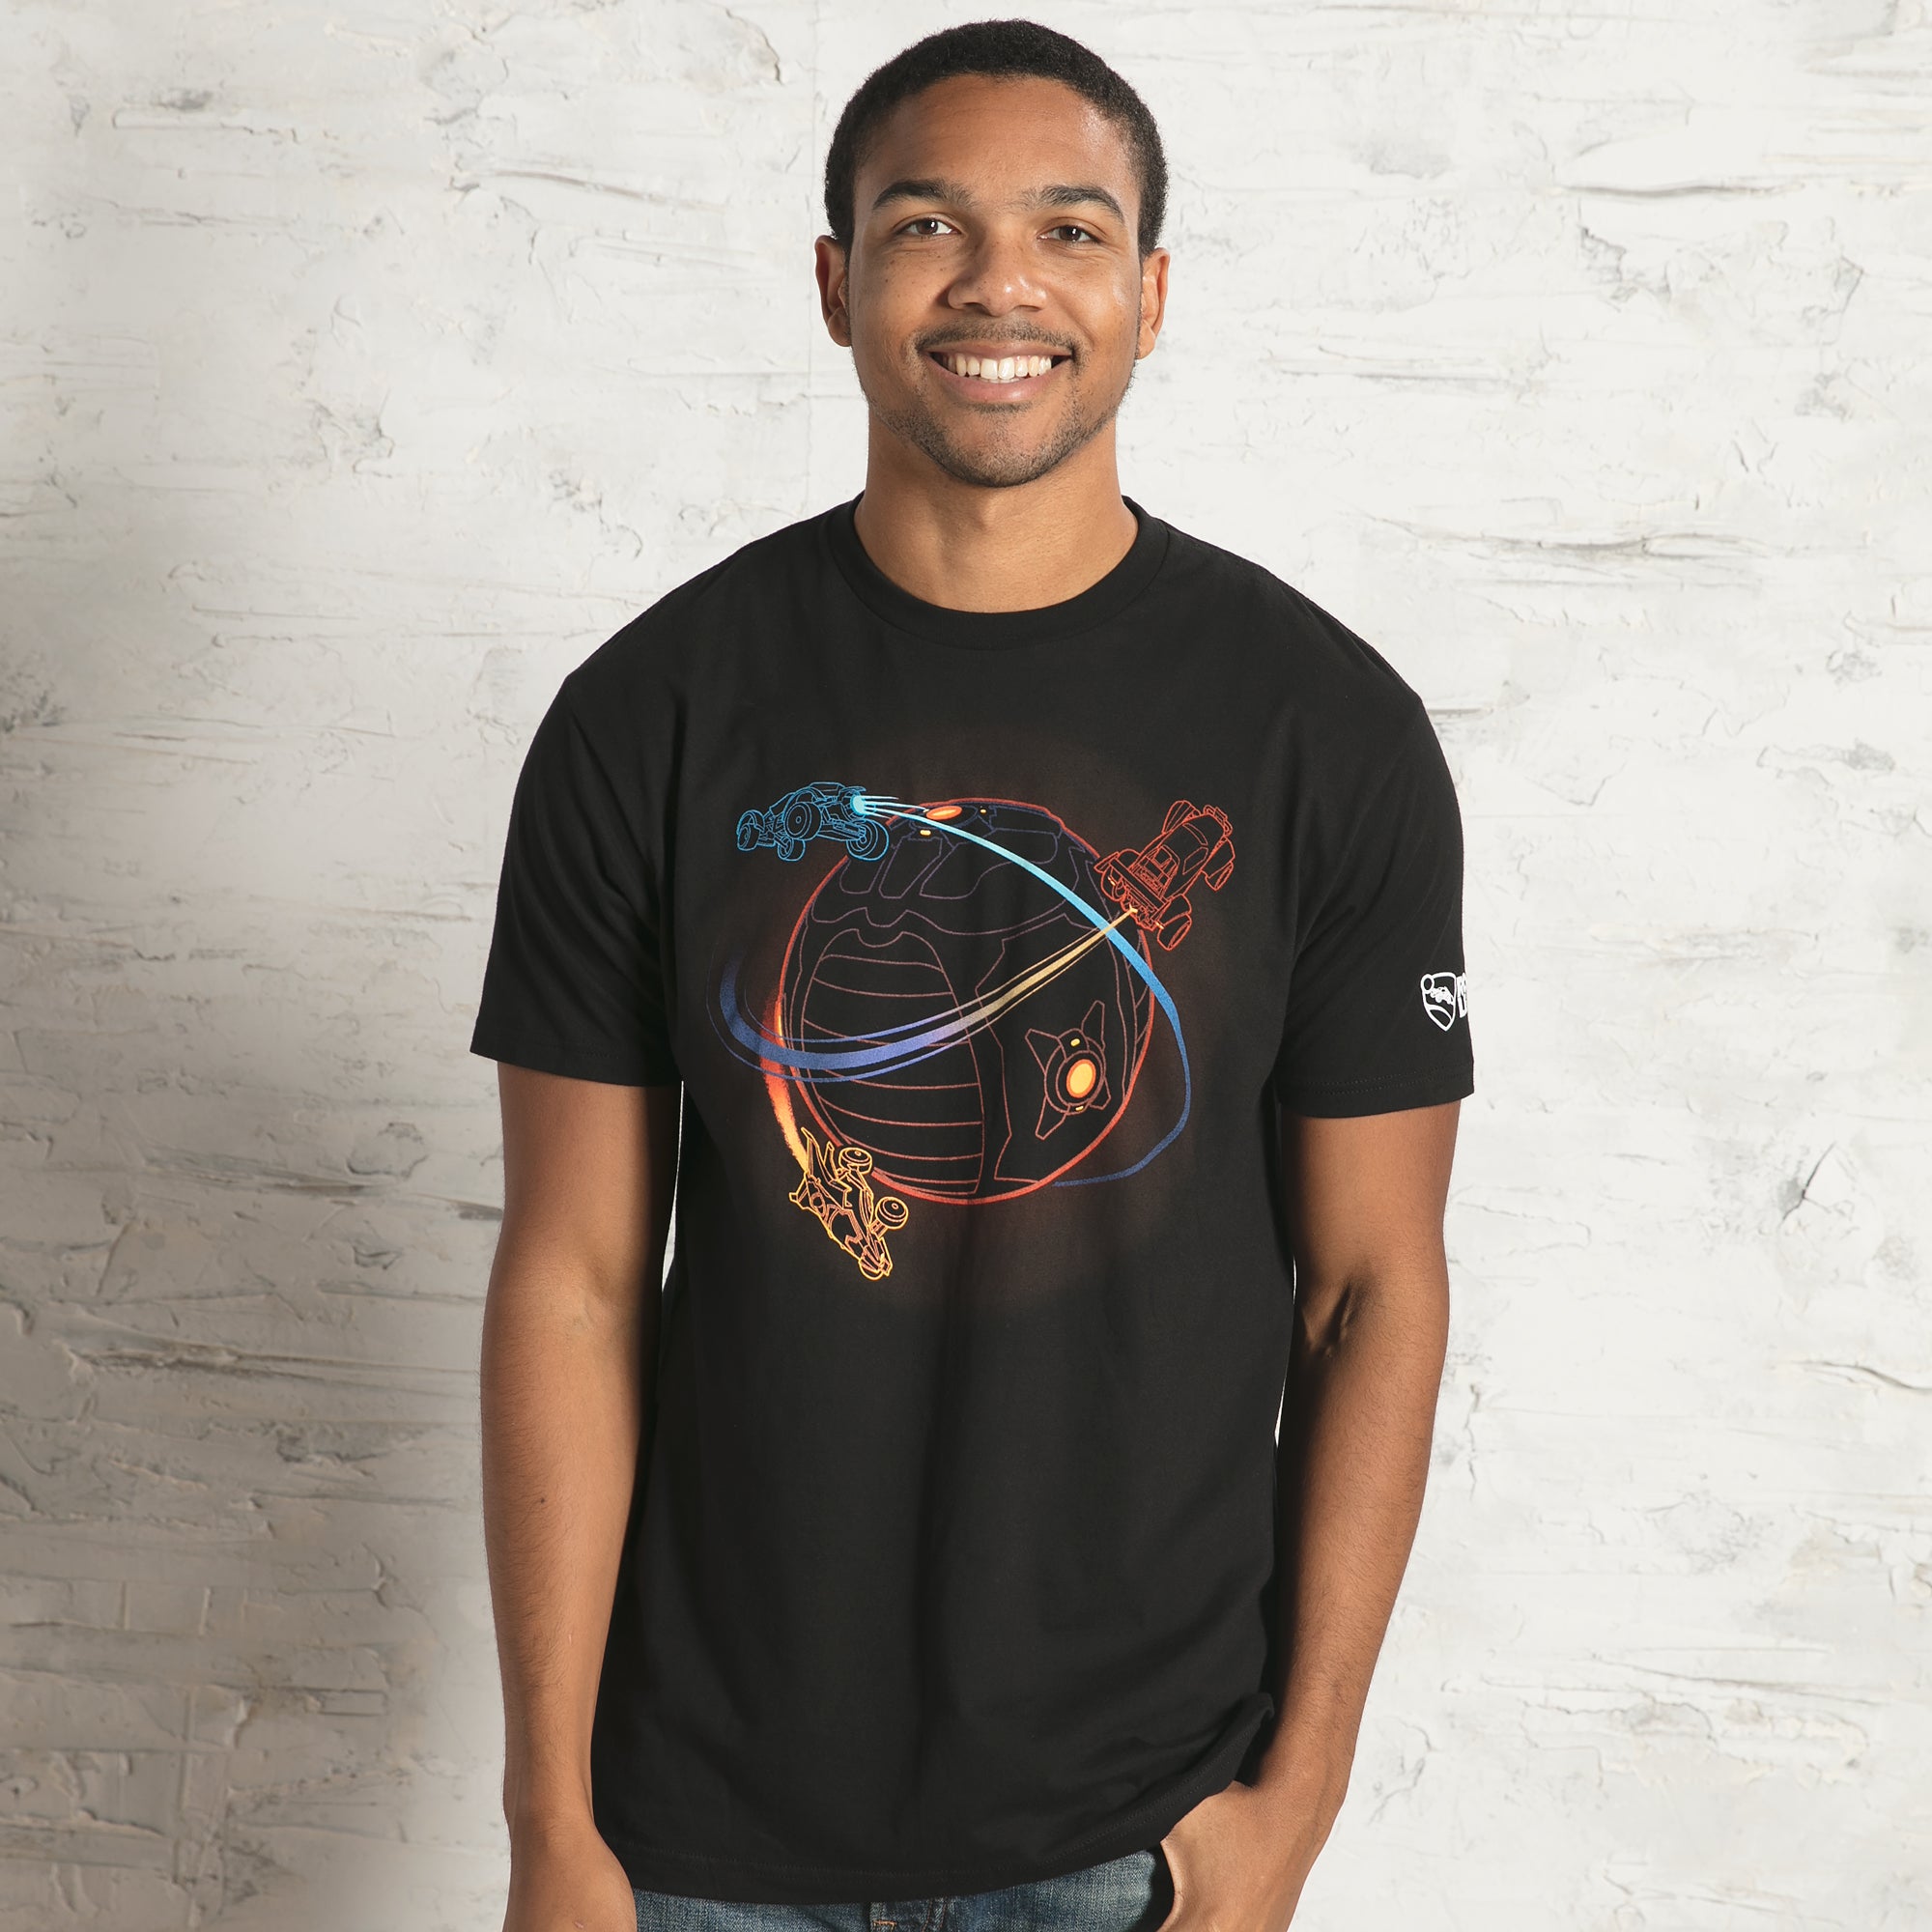 J!NX and Rocket League Team Up for Official Store